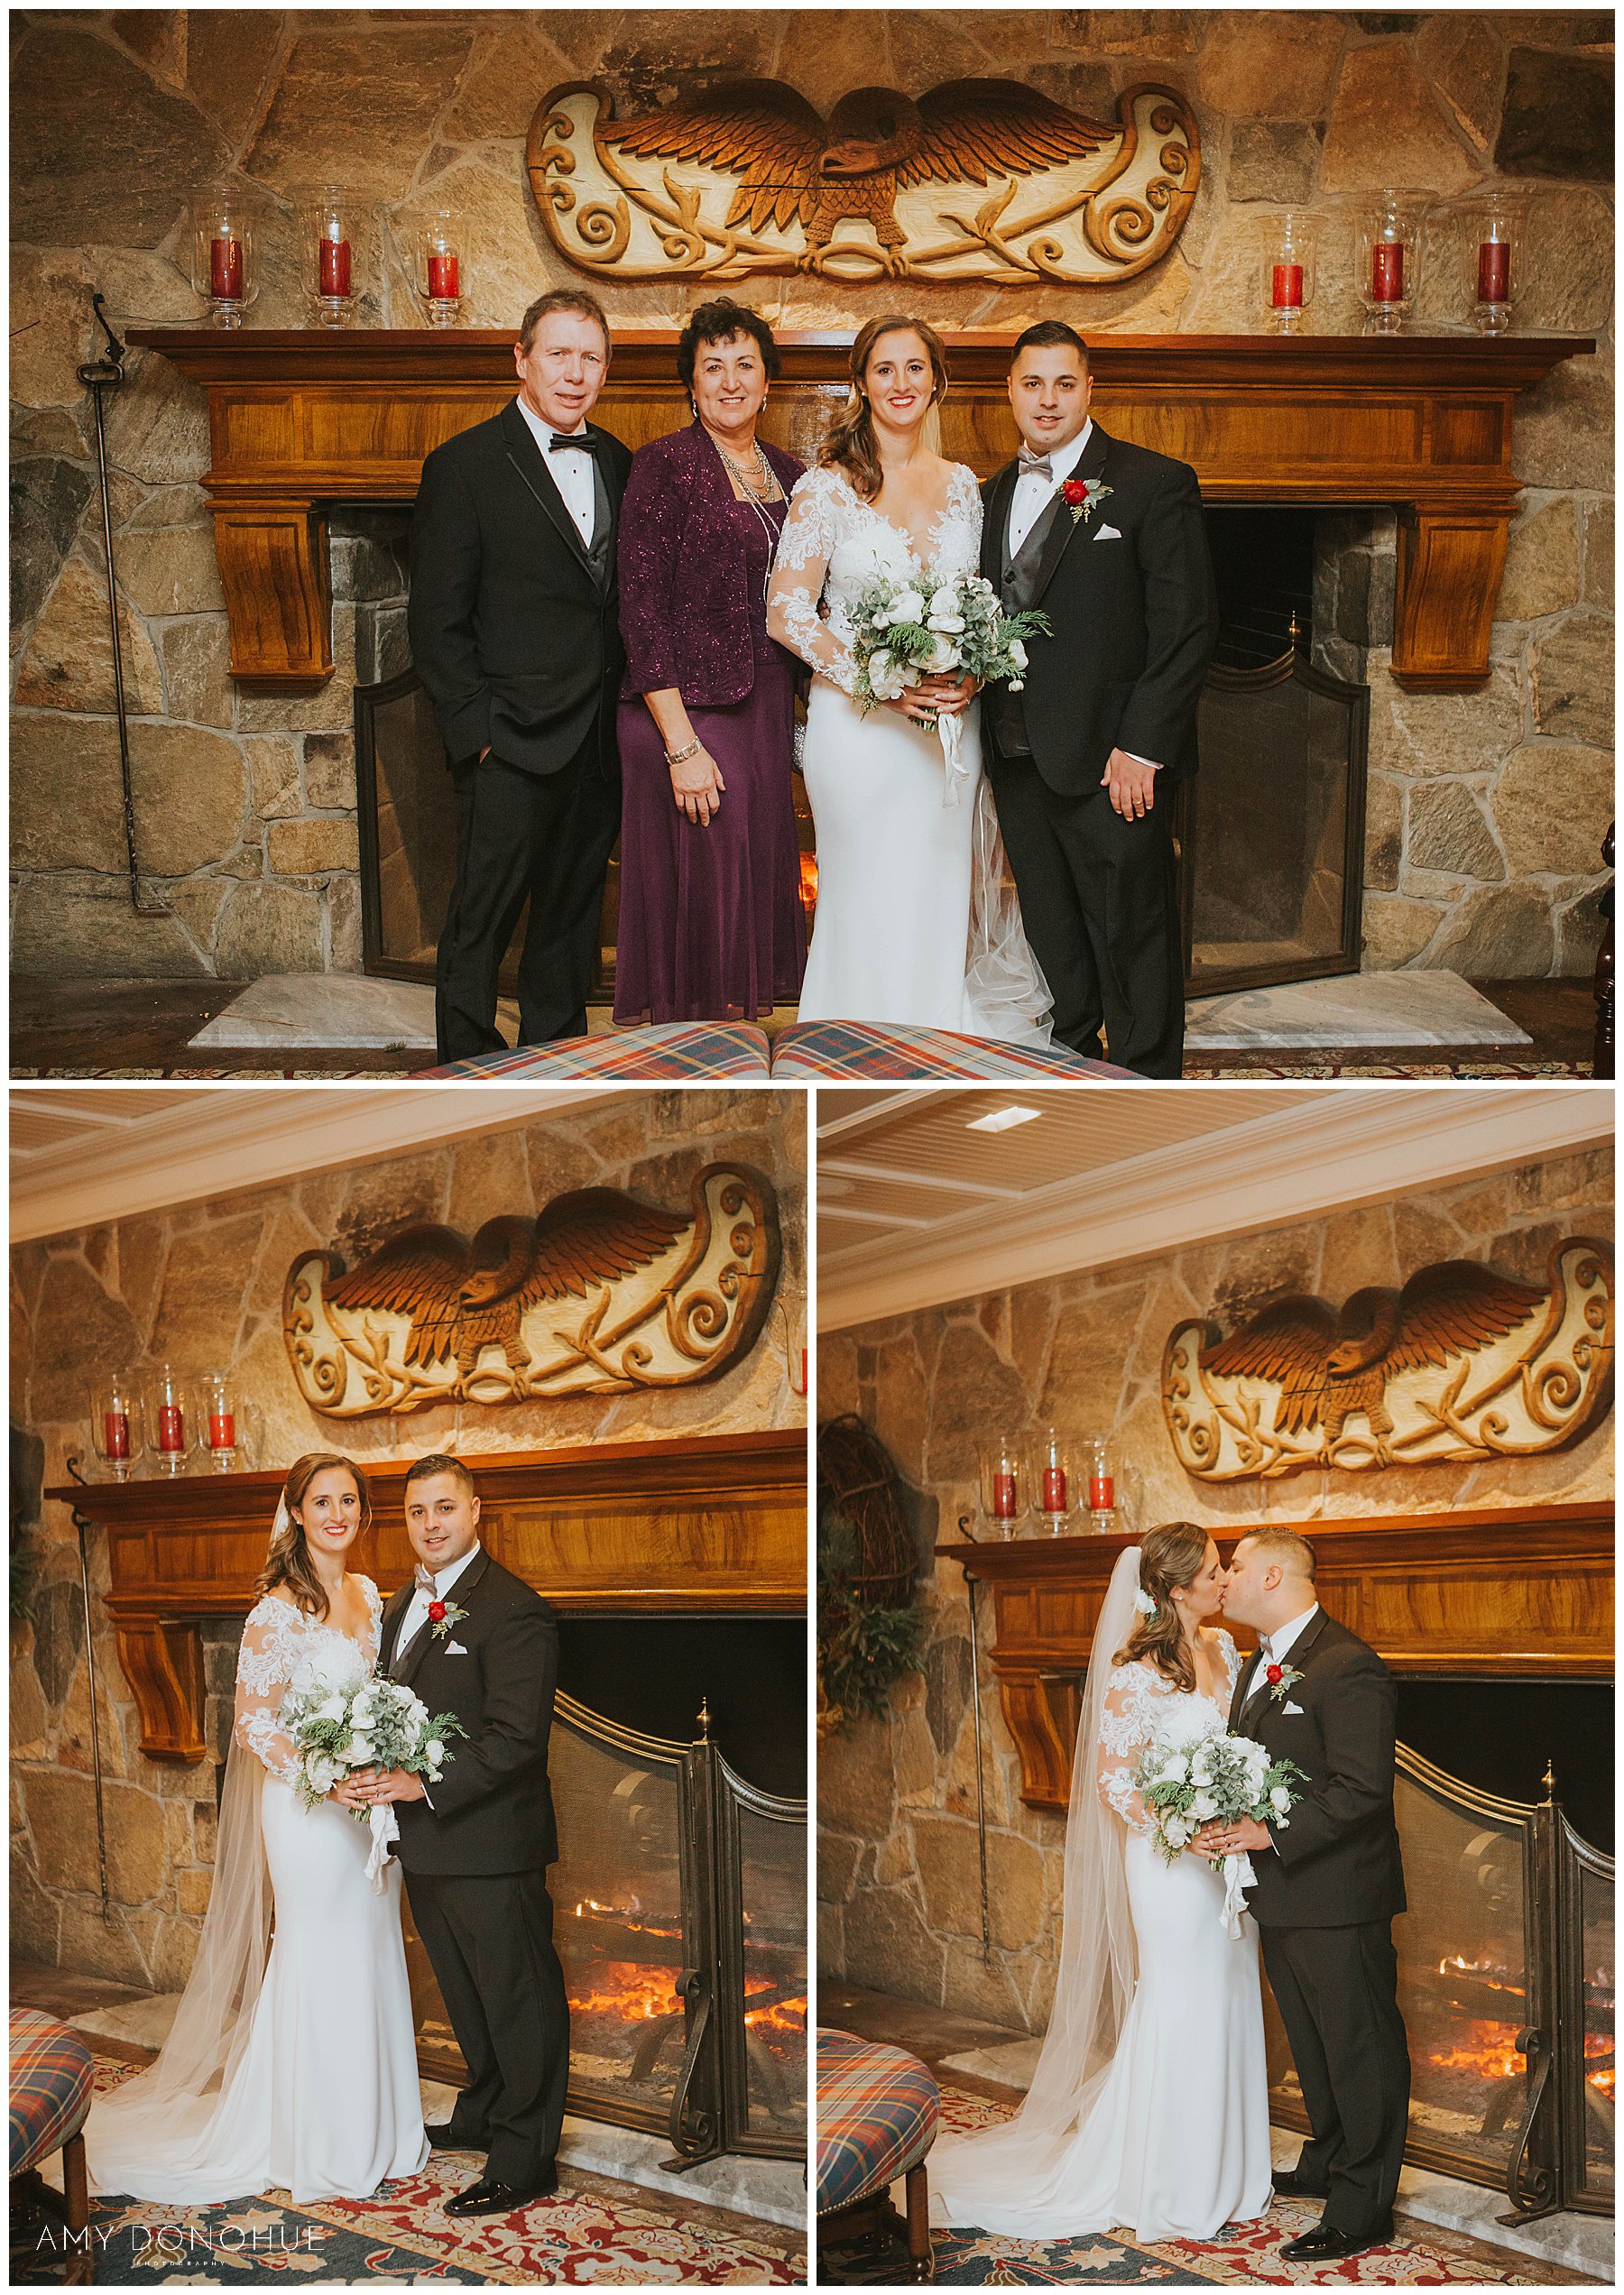 Wedding portraits in front of the fireplace | Woodstock Inn & Resort | VT Wedding Photographer | © Amy Donohue Photography